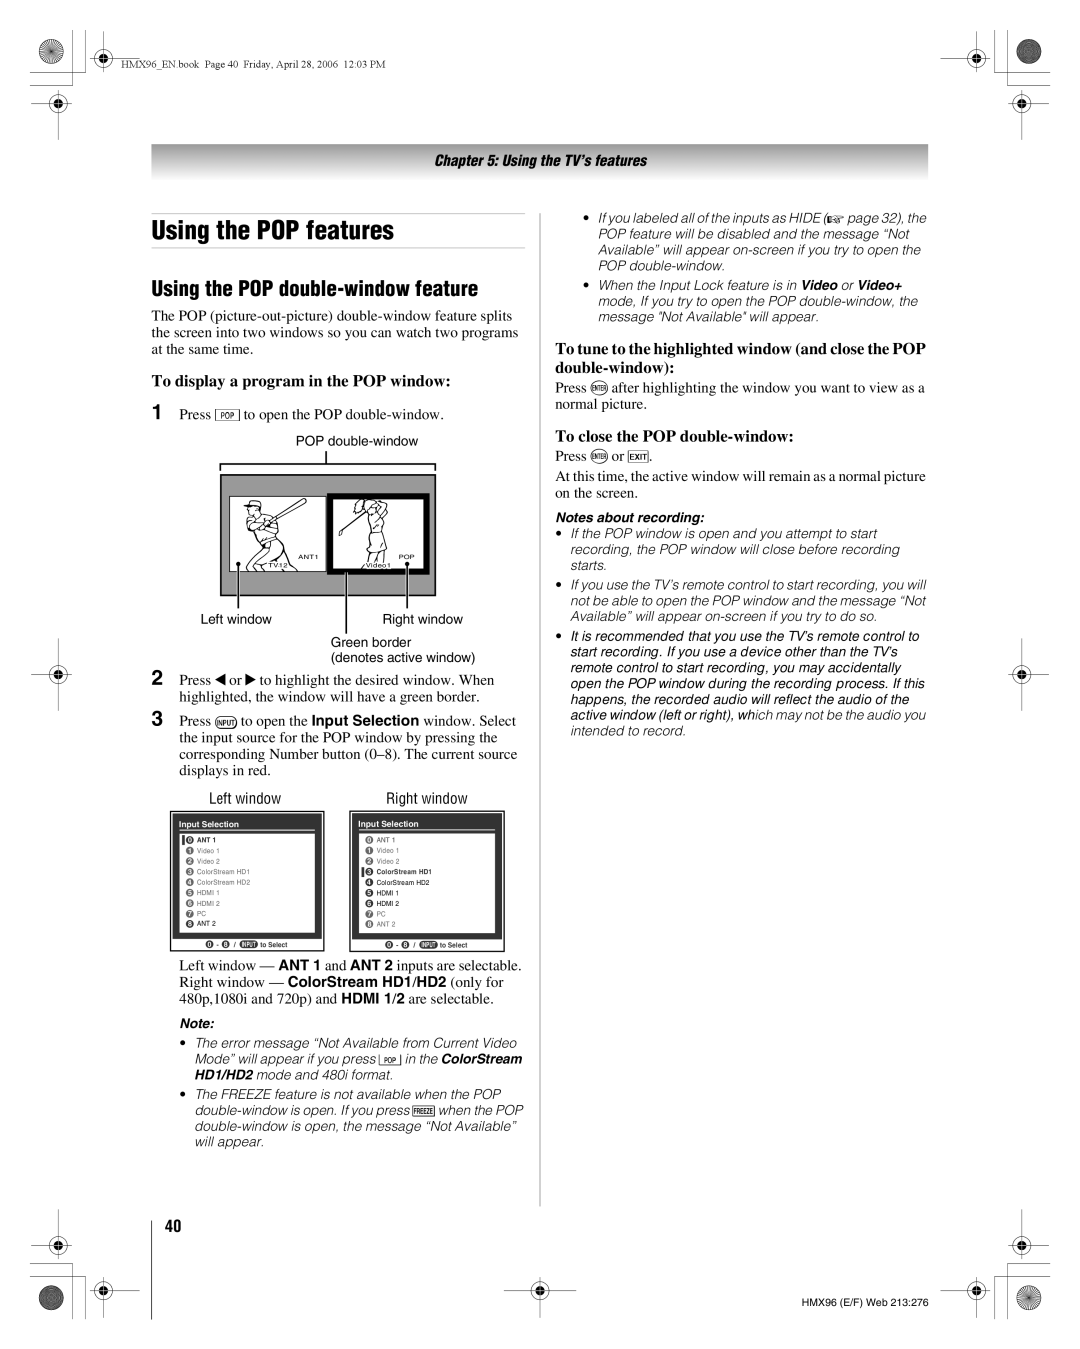 Toshiba 50HMX96 manual Using the POP features, Using the POP double-window feature, To display a program in the POP window 